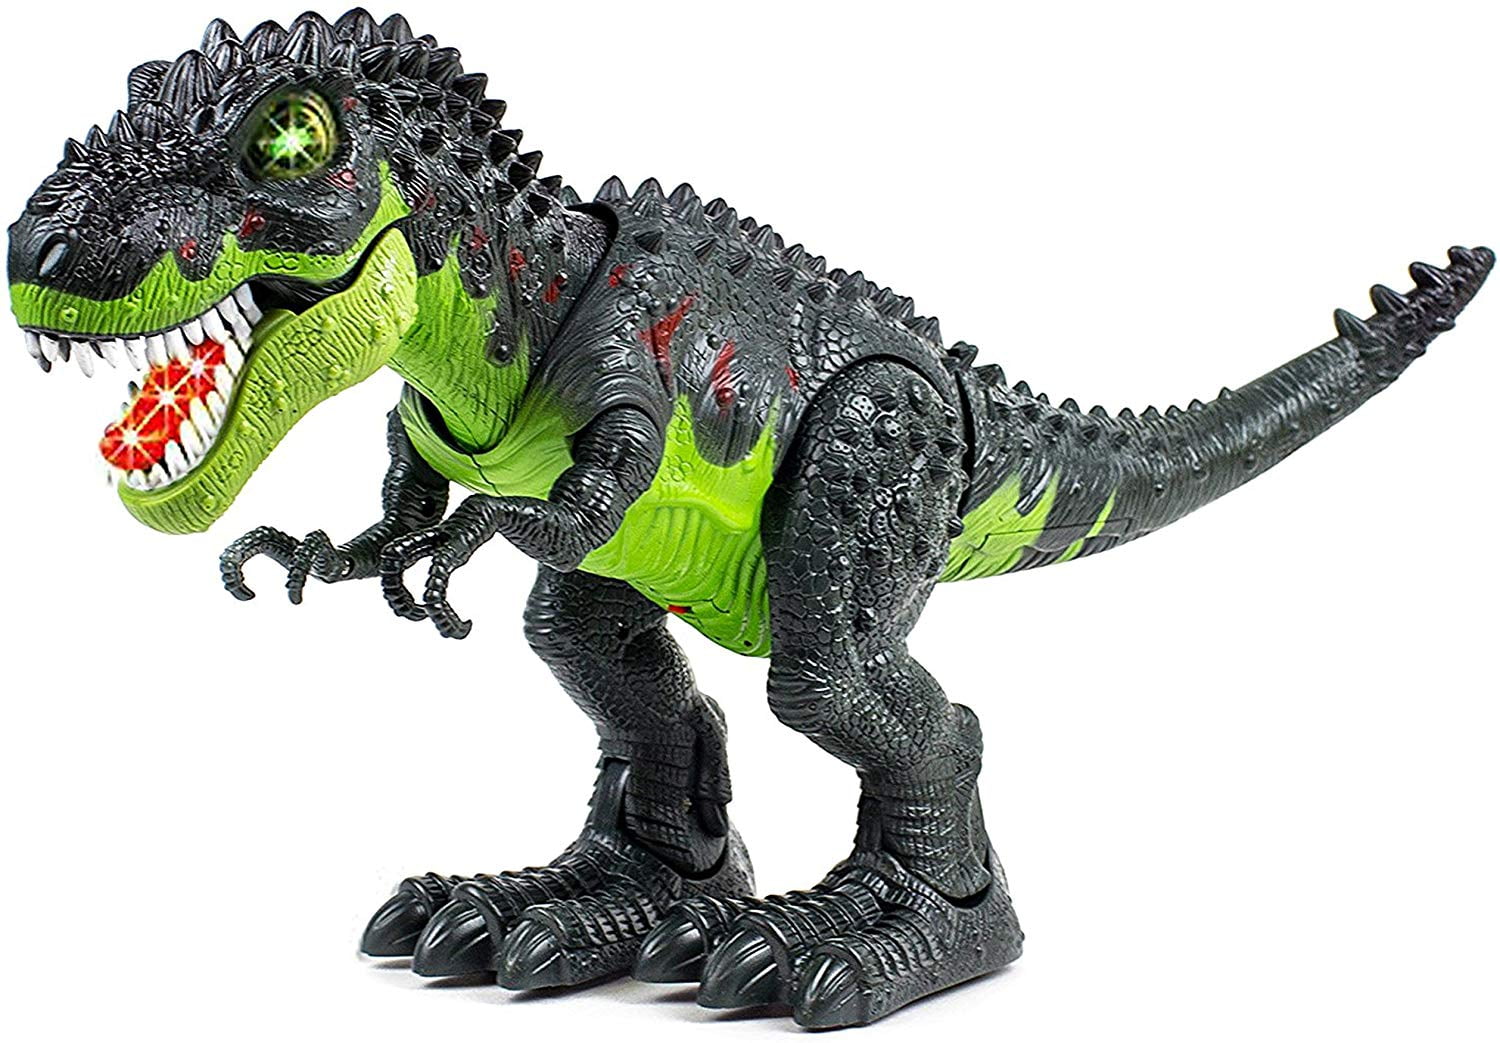 Green T-Rex Walking Dinosaur Figure With Lights Sounds Real Movement Kid's Toy 